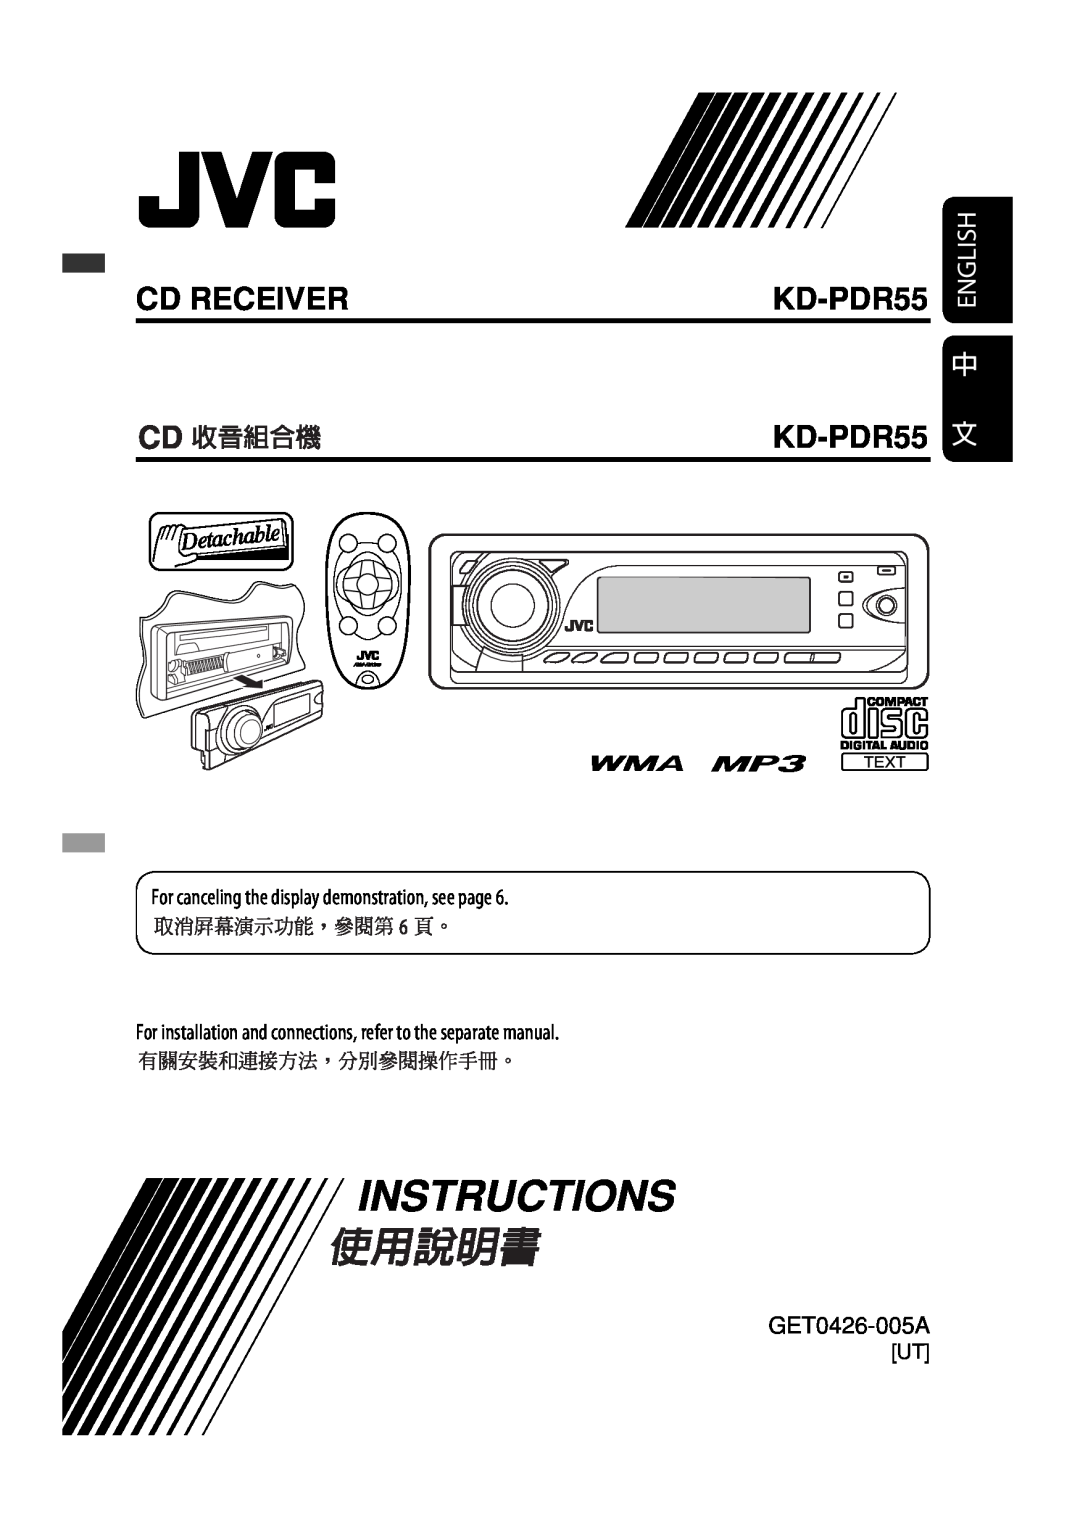 JVC GET0425-001A manual Instructions, Cd Receiver, KD-PDR55 KD-PDR55, English, GET0426-005A 